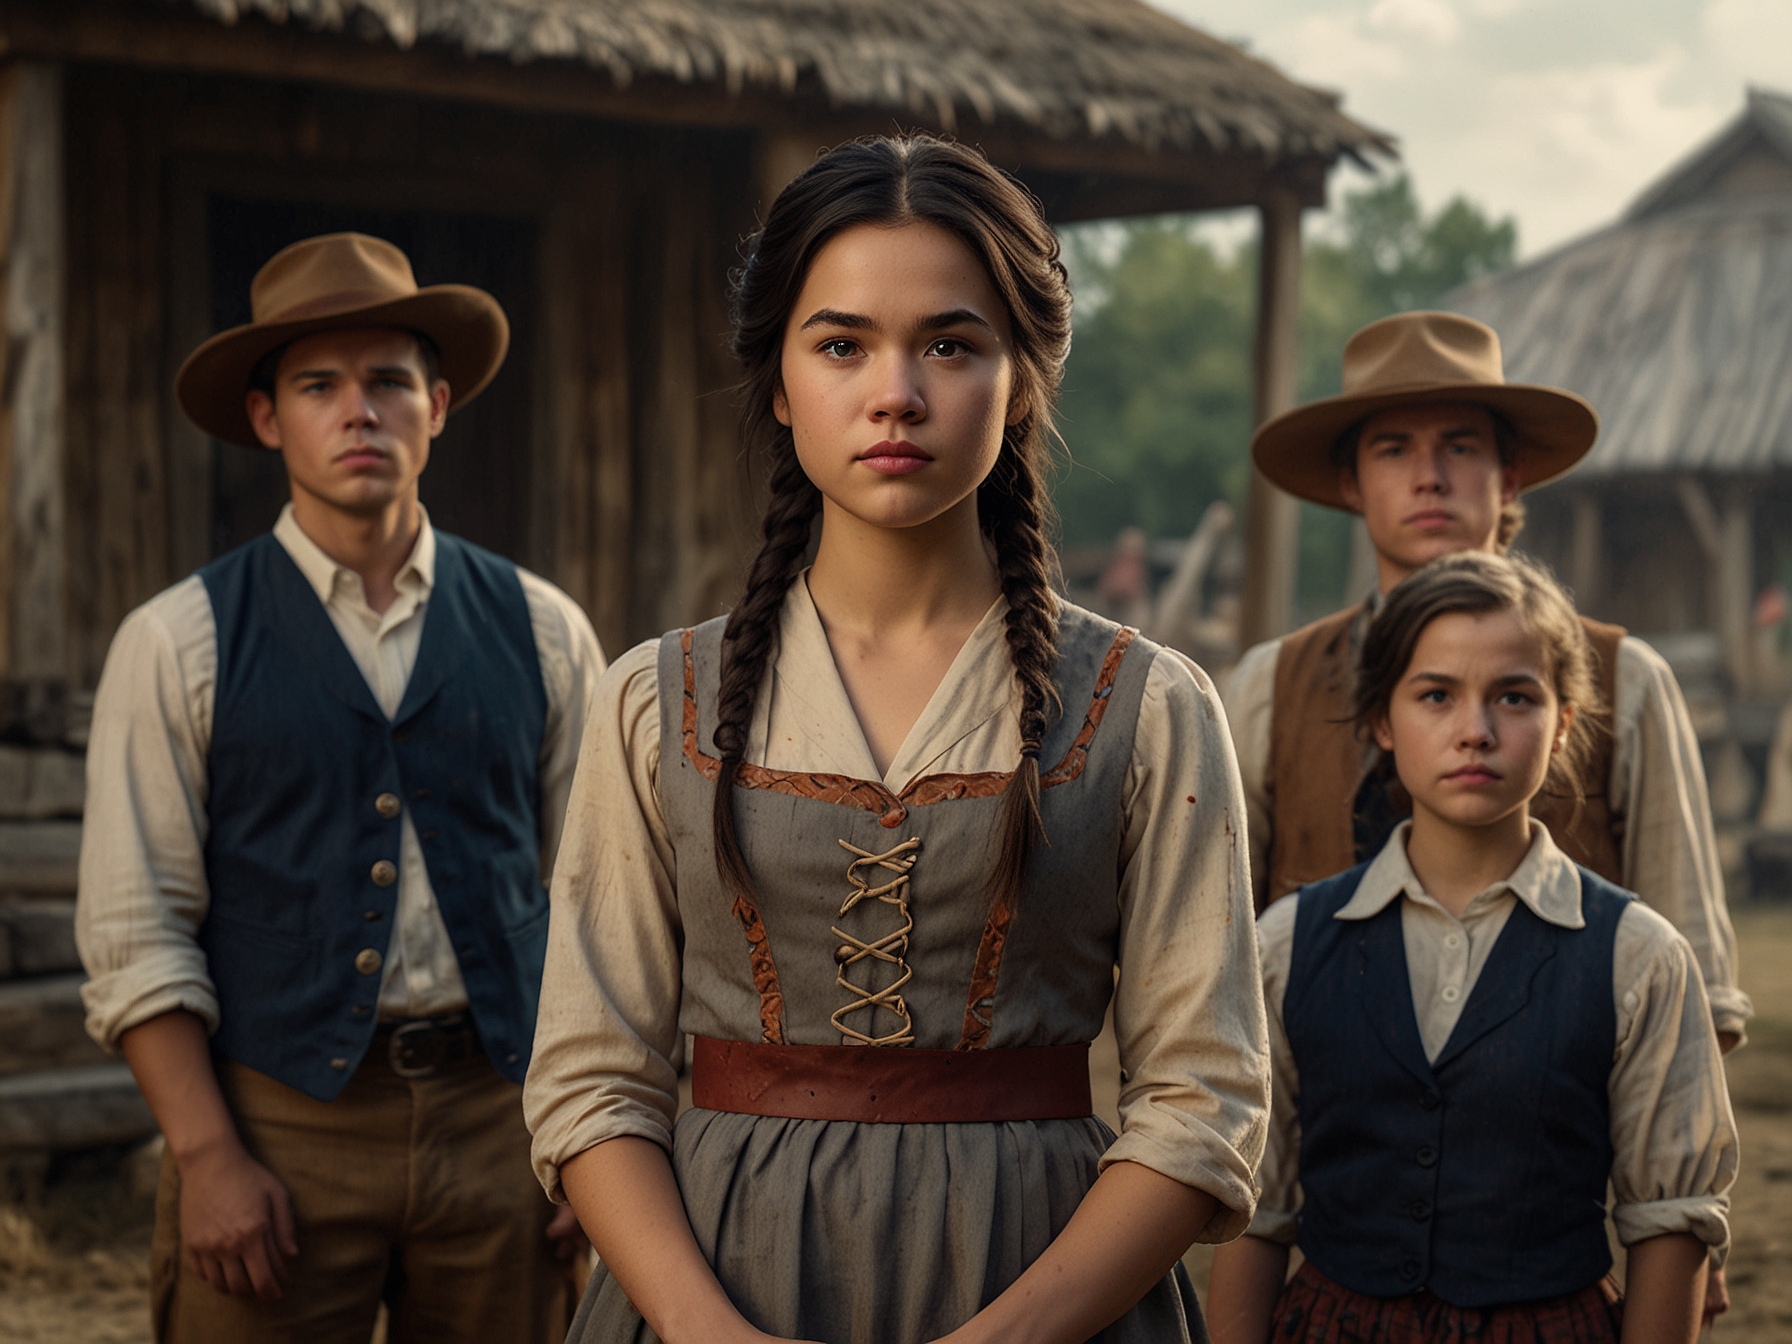 Peyton Elizabeth Lee stands in historical reenactment village attire, surrounded by fellow survivors, hinting at the comedic and eerie challenges they will face in 'Carved.'